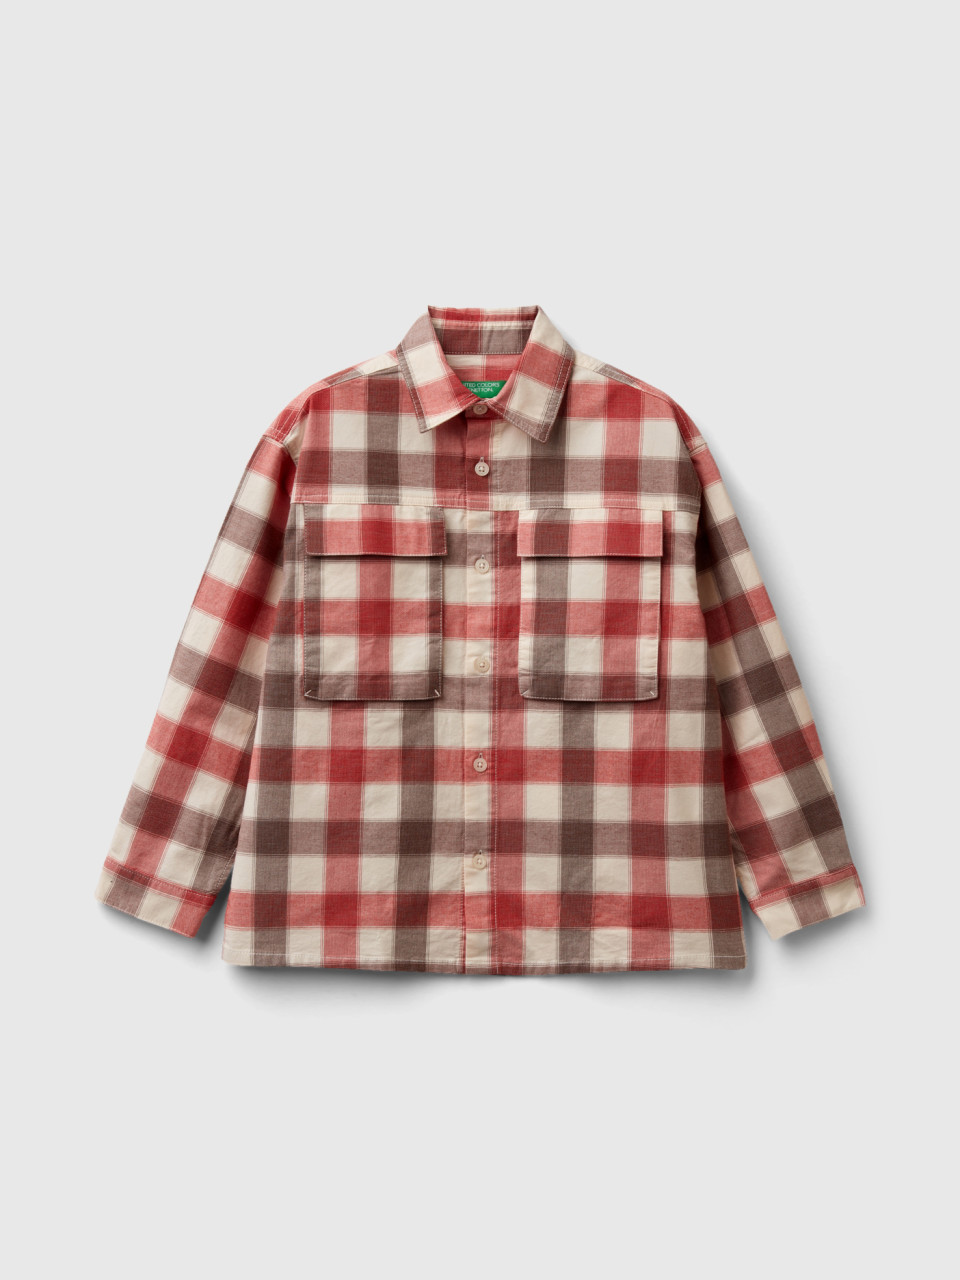 Benetton, Check Shirt In Stretch Cotton, Red, Kids